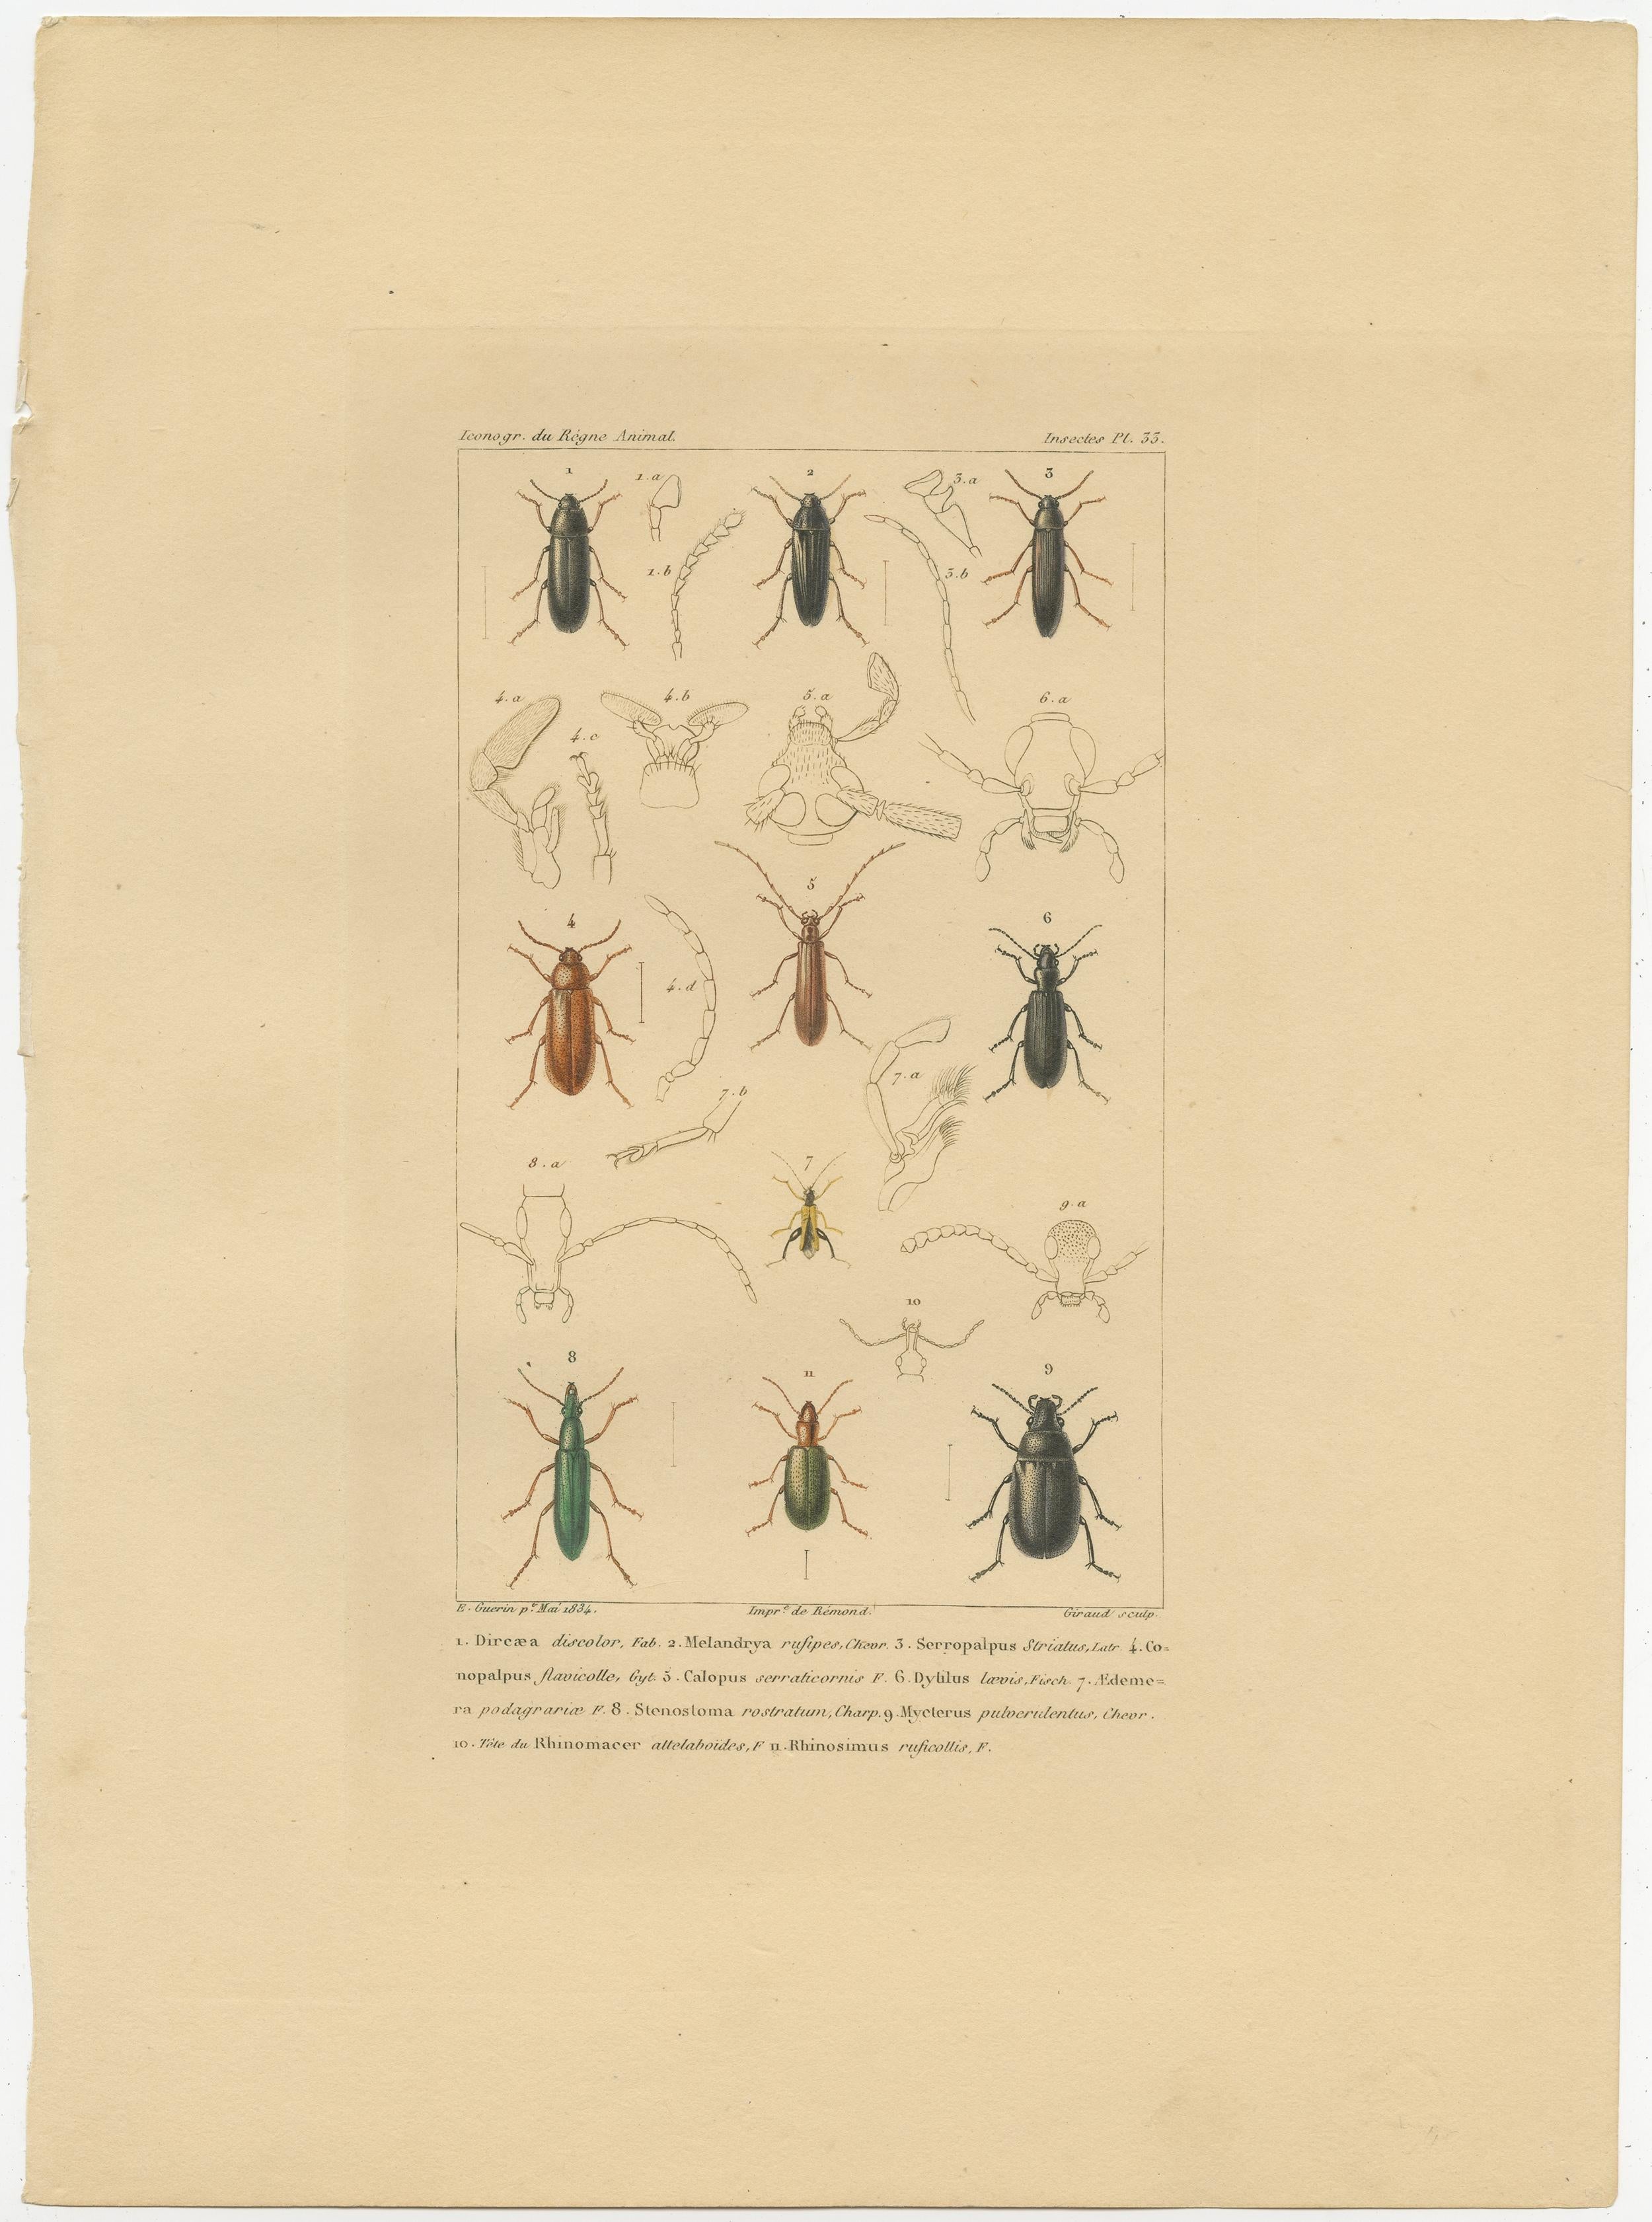 Antique print titled 'Insectes Pl.33'. 

Original antique print of various insects / beetles. This print originates from 'Iconogr. du Regne Animal' published 1834. 

Artists and Engravers: Engraved by Giraud.